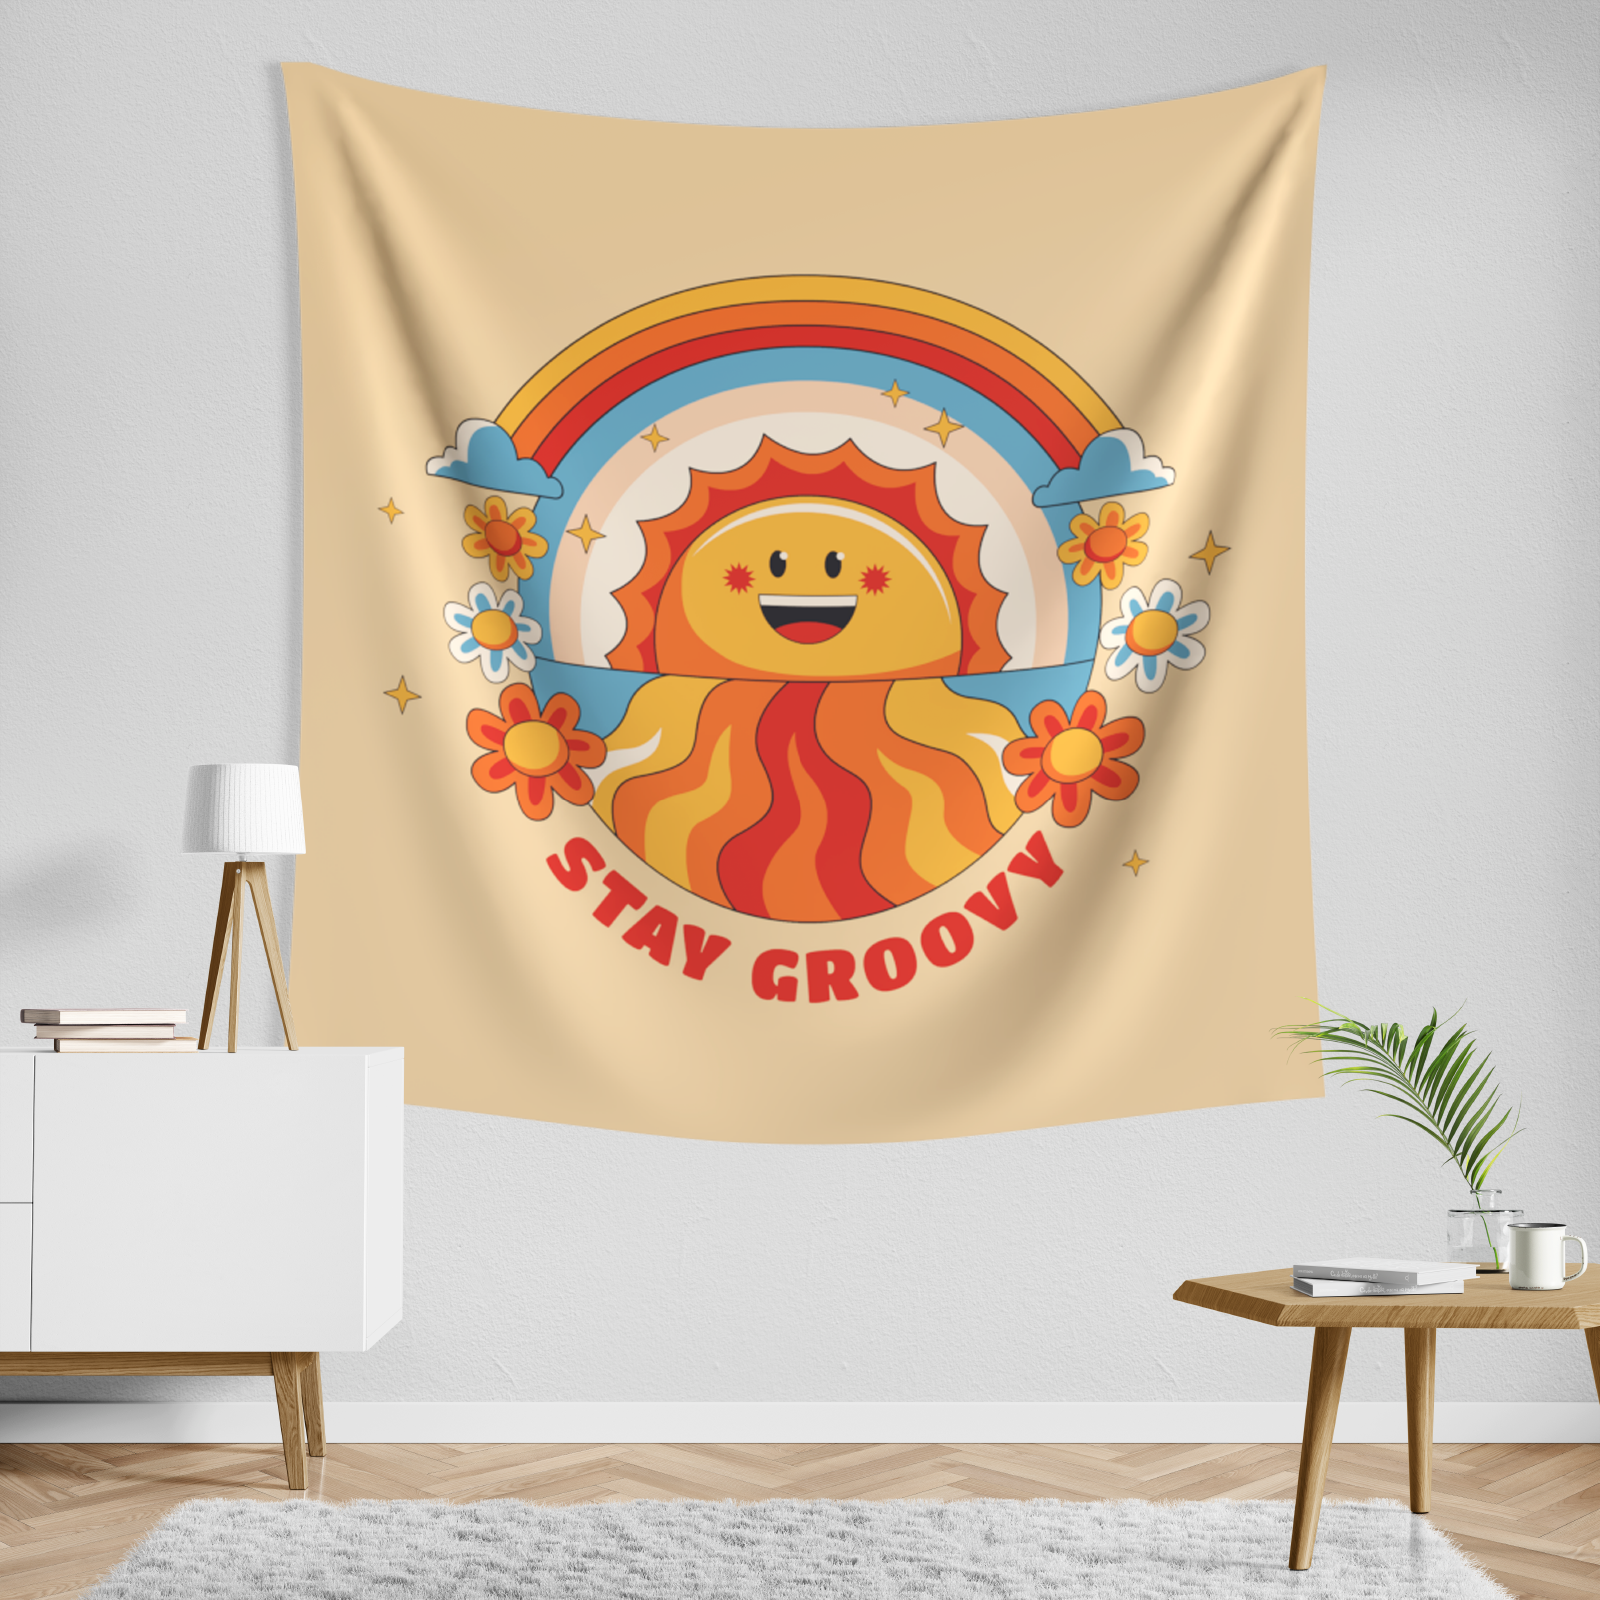 Stay Groovy Tapestry